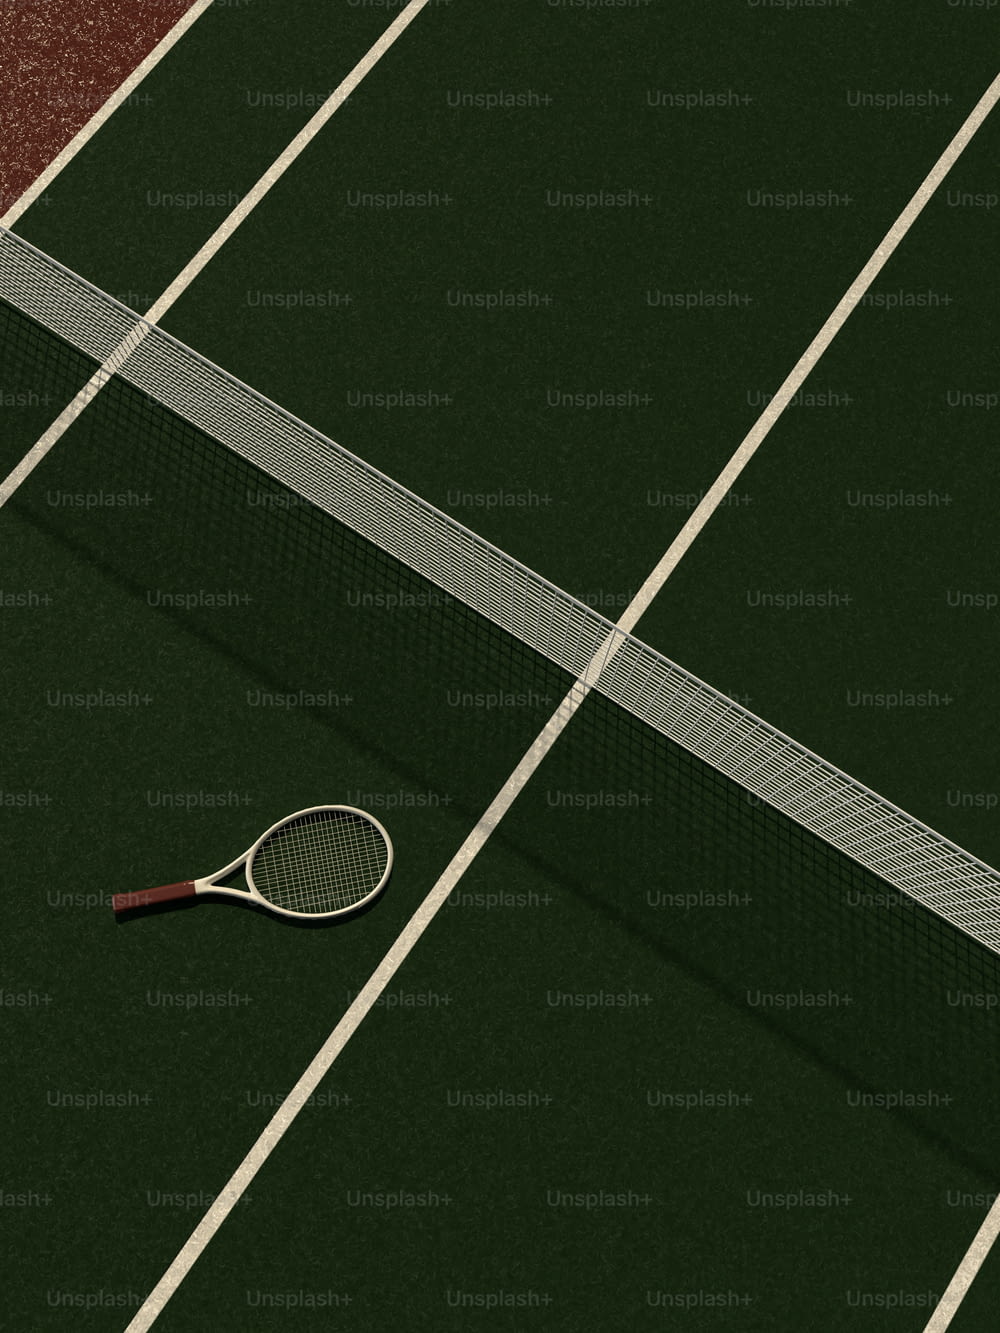 a tennis racket and ball on a tennis court